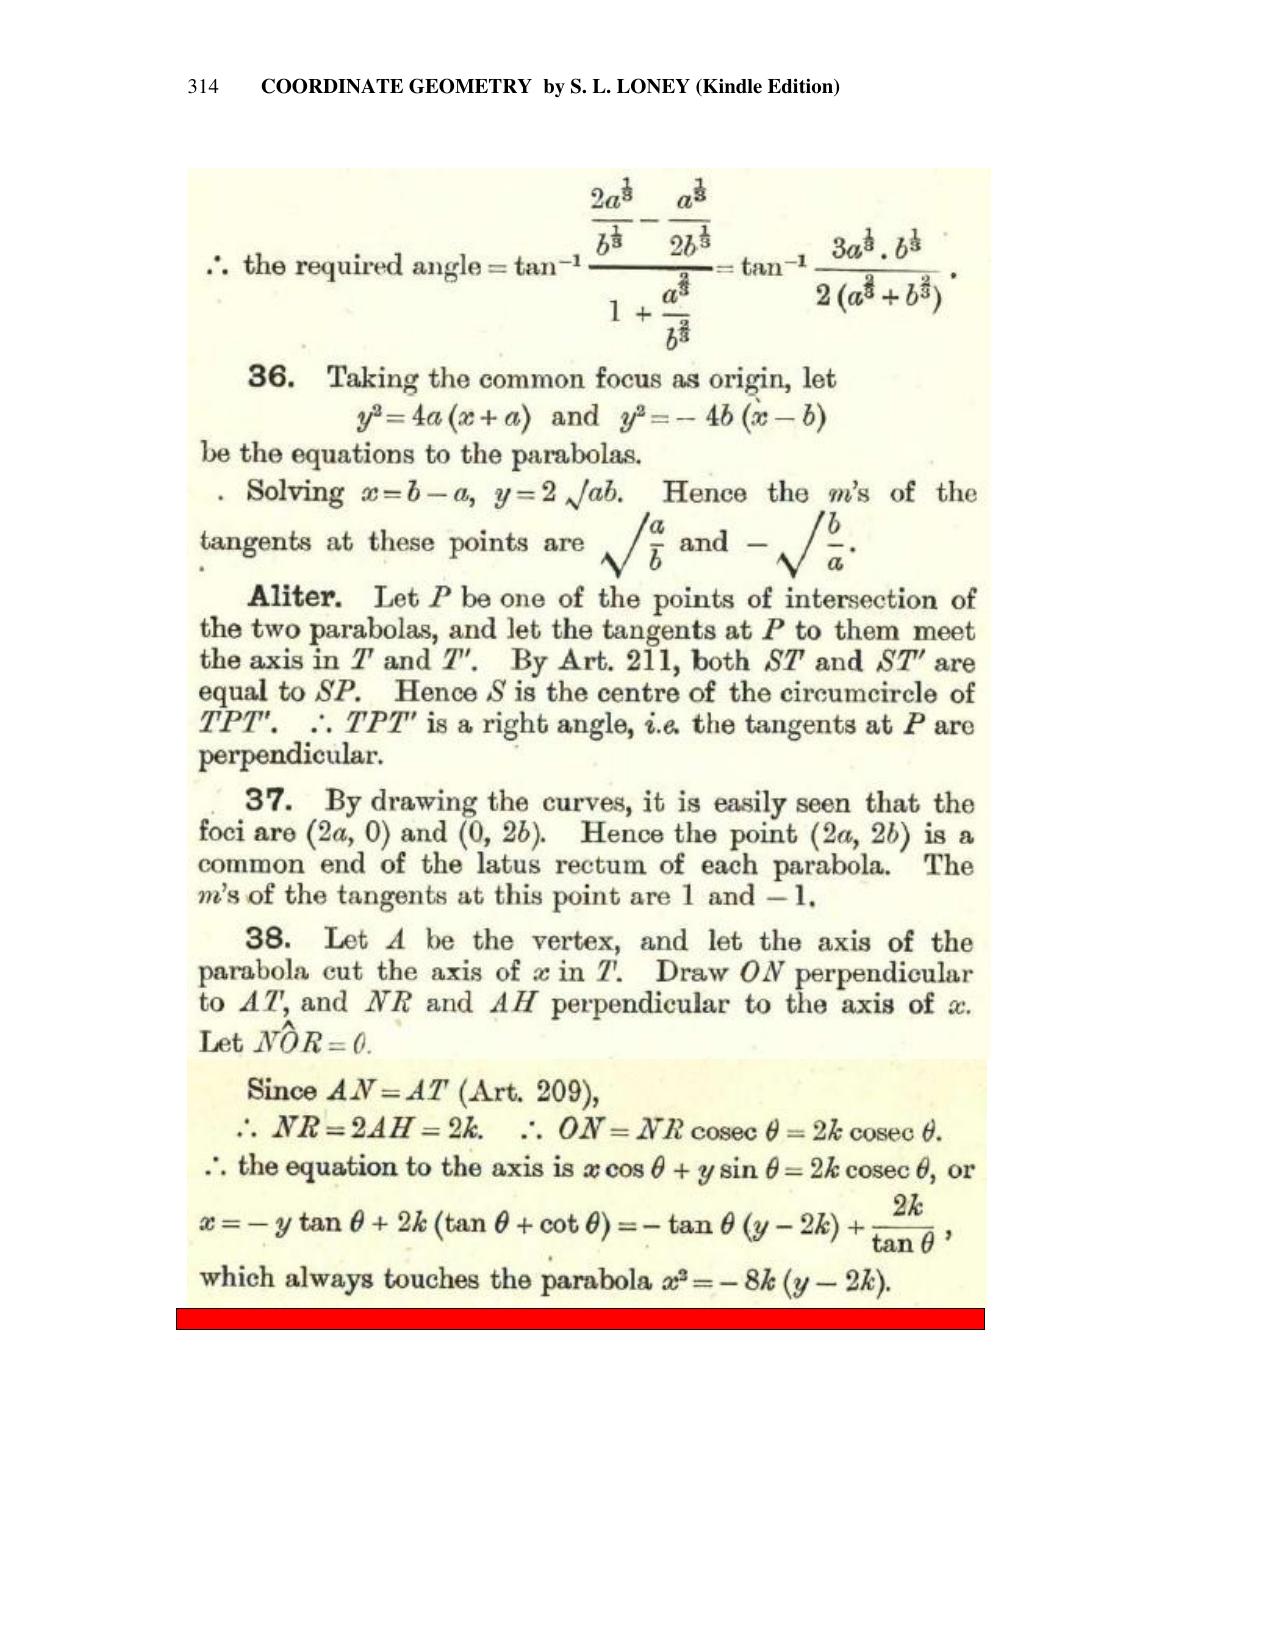 Chapter 10: The Parabola - SL Loney Solutions: The Elements of Coordinate Geometry - Page 28